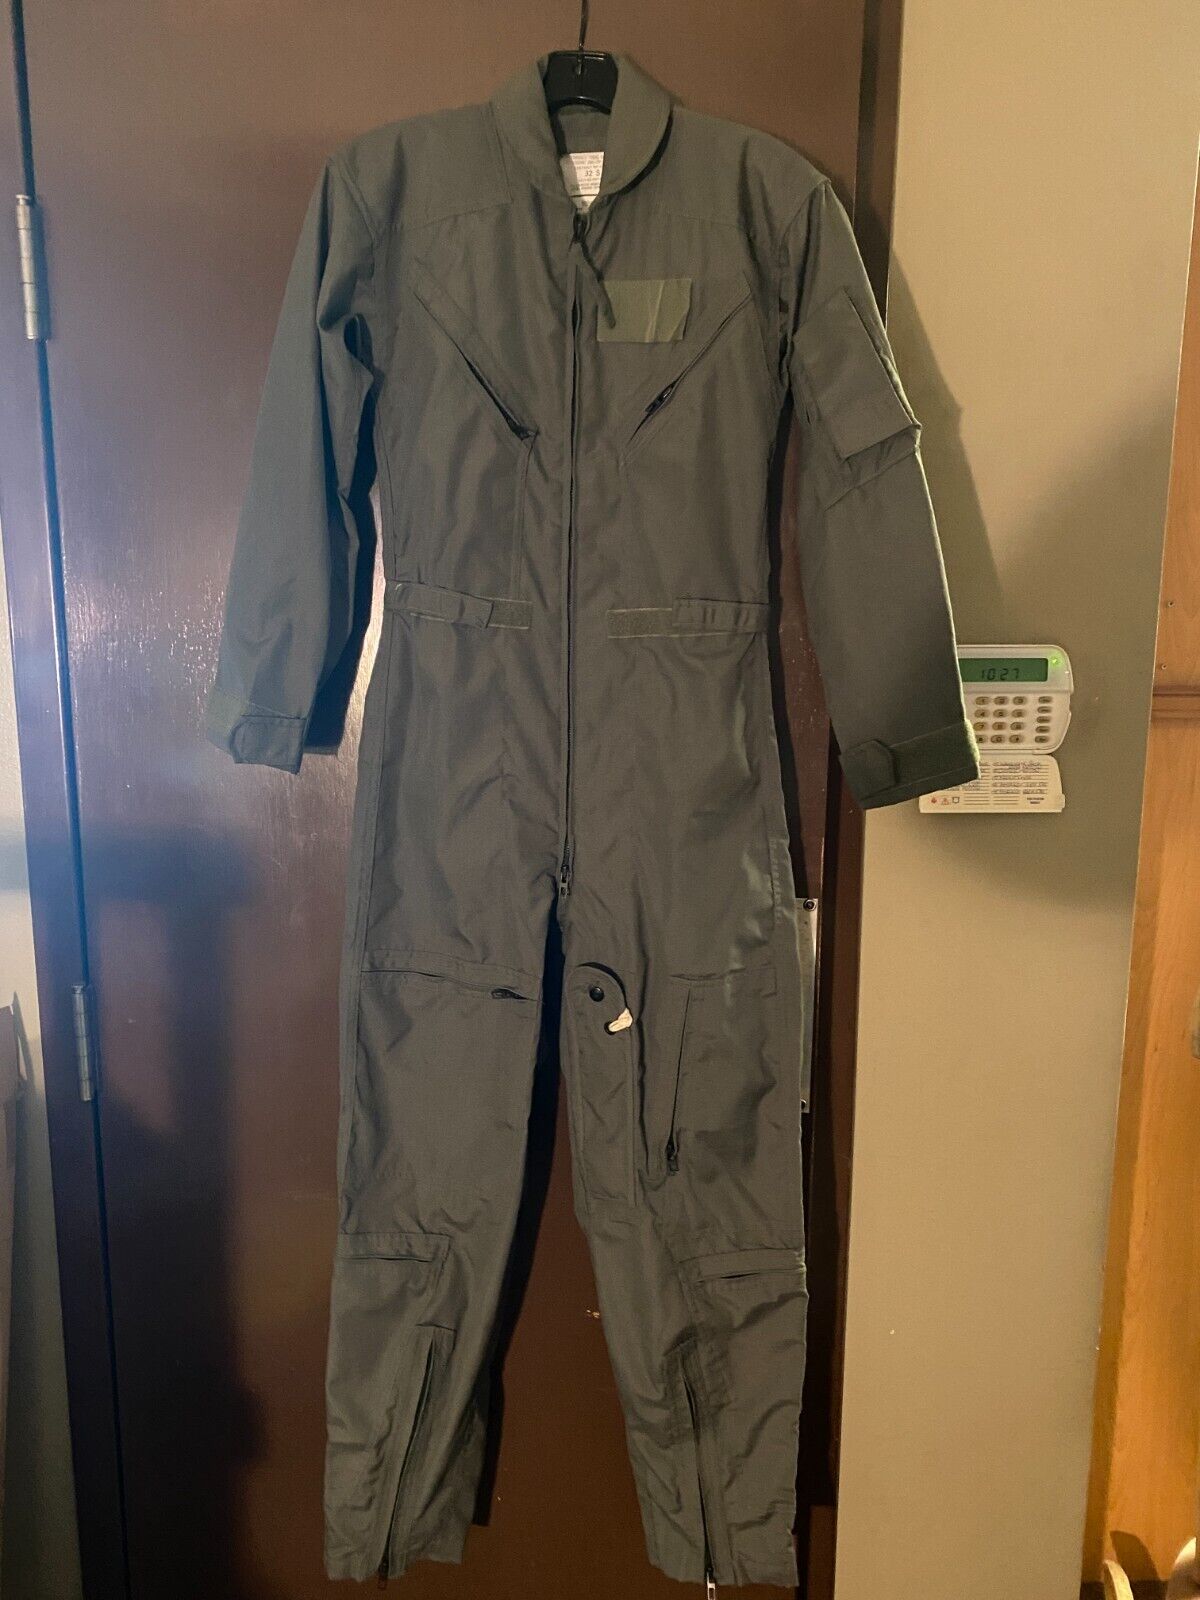 GI Issue Summer Flight Suit, CWU-27/p Flyers Coveralls 32S NSN# 8415-01-043-8376